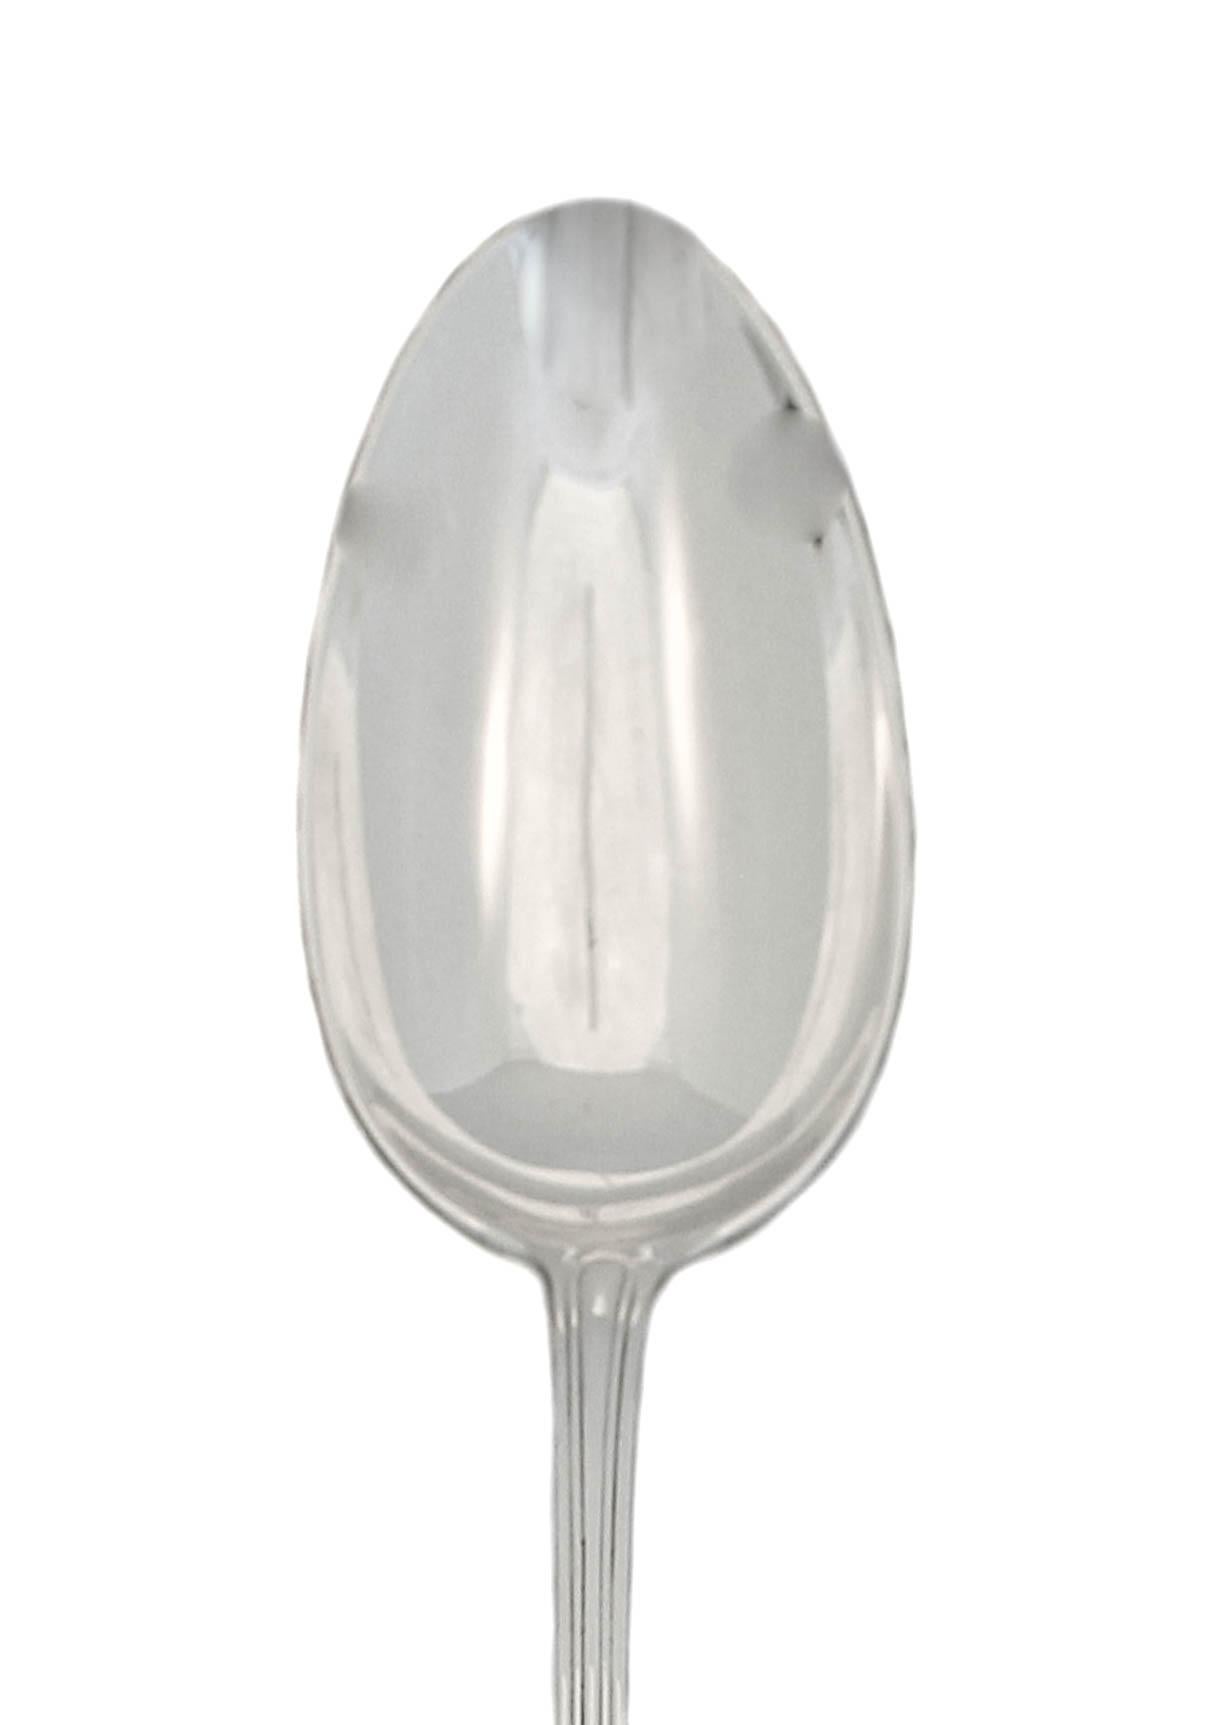 A very early and rare sterling silver platter spoon by the world renowned Tiffany & Company.  Manufactured in 1869 in the “Tiffany” pattern, it is the oldest pattern by the company.  Unlike other serving pieces, this spoon is over a foot long and